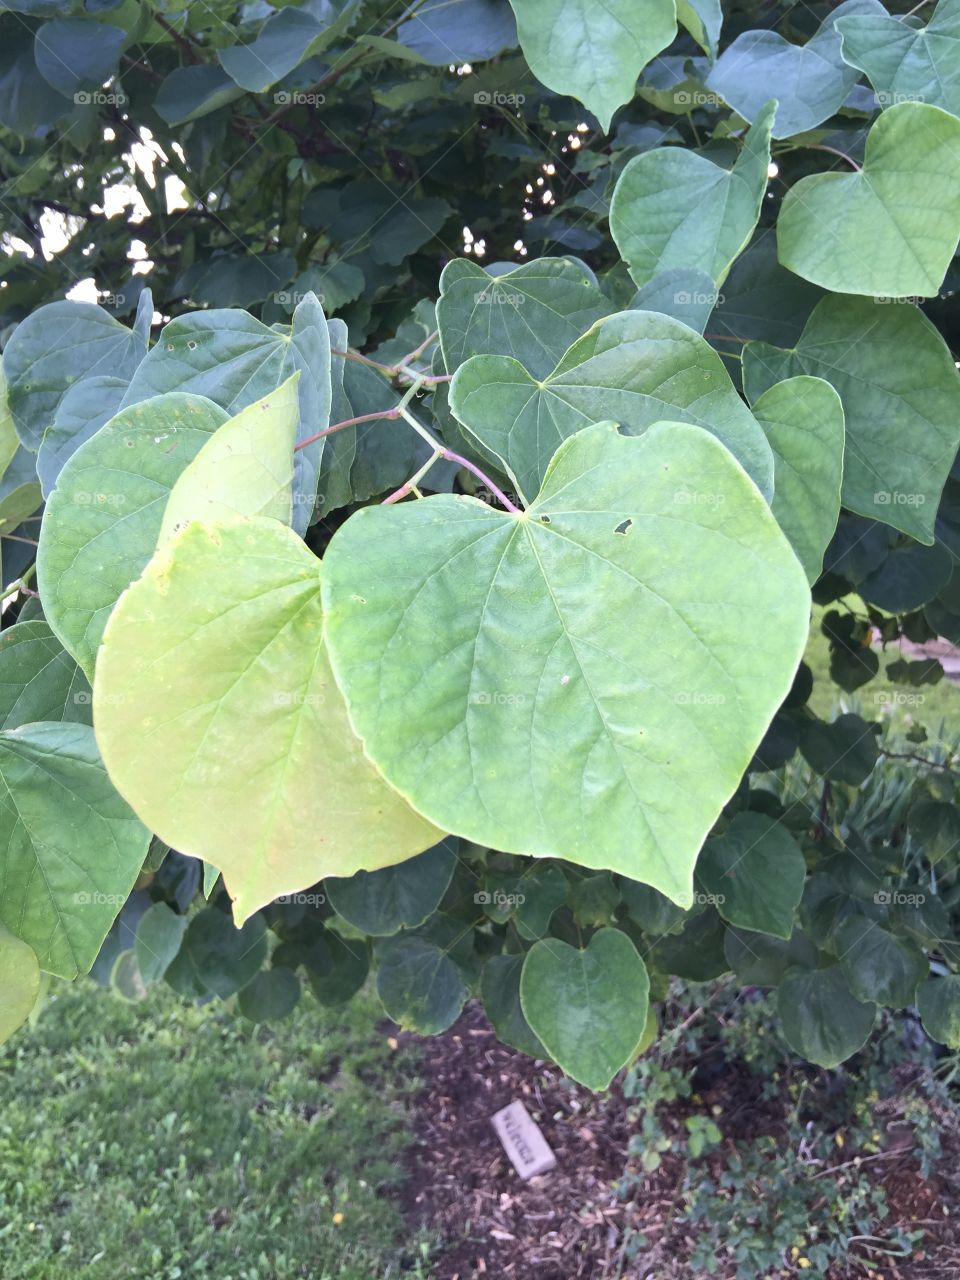 Have a Heart. Redbud tree has very distinct heart-shaped leaves this year.